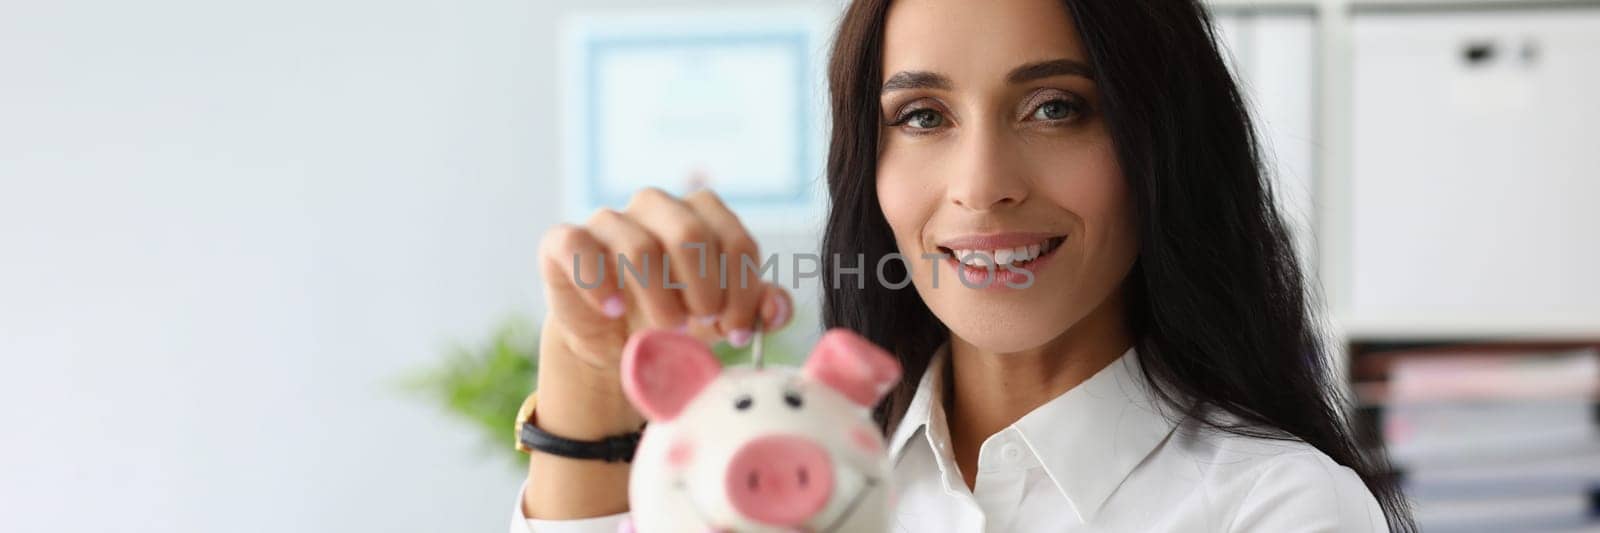 Portrait of smiling woman throwing coin into piggy bank by kuprevich